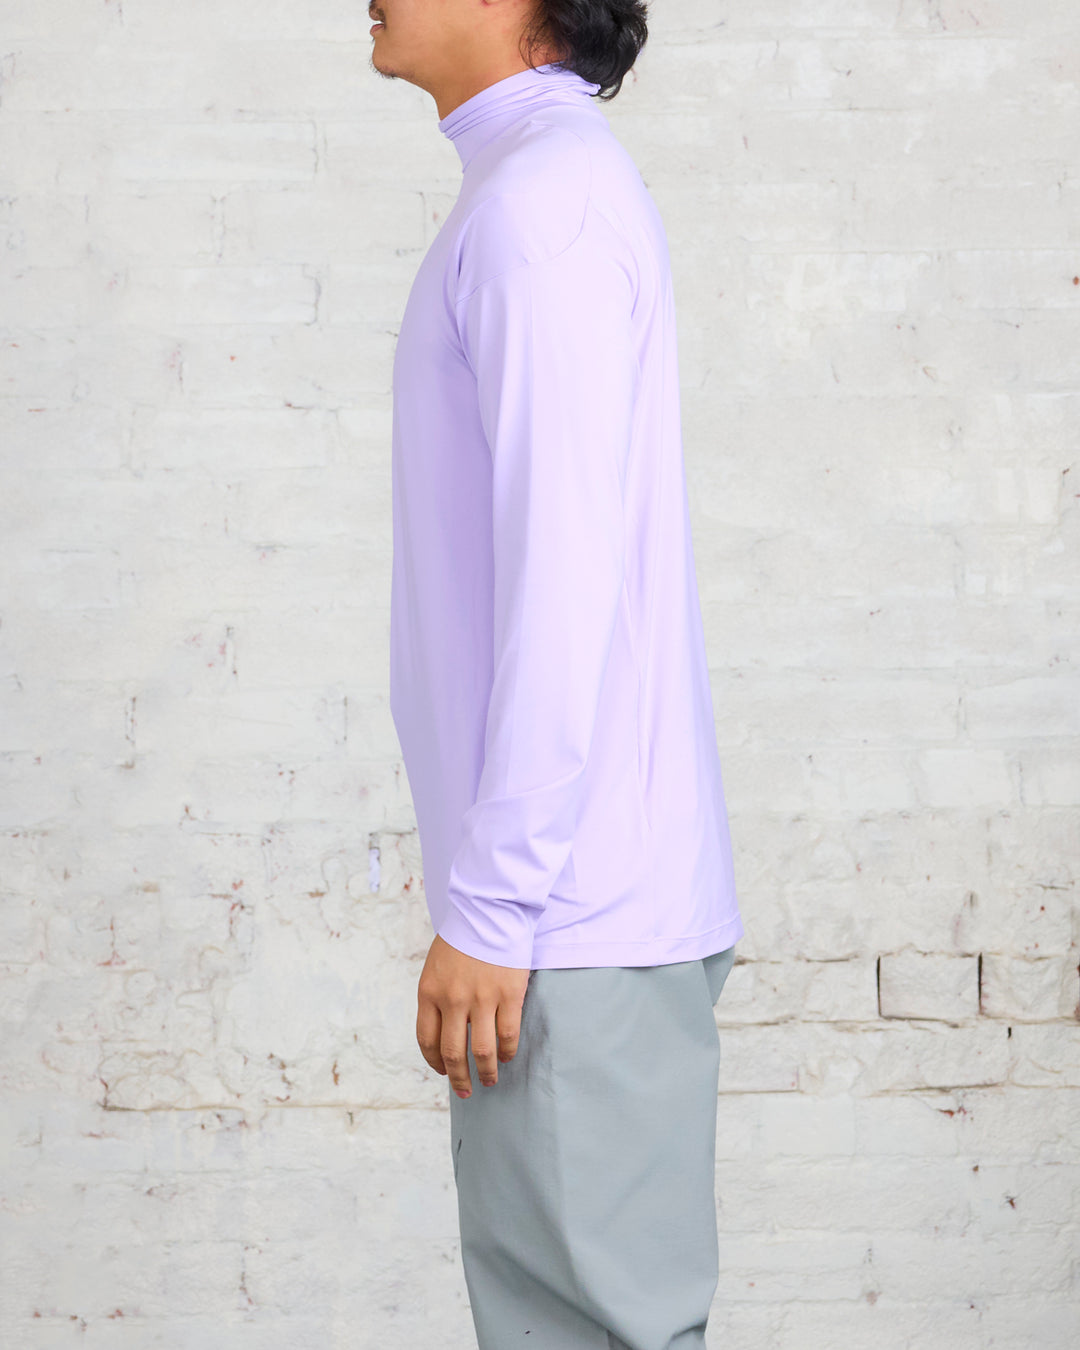 POST ARCHIVE FACTION (PAF) 5.1 Long Sleeve Right Lavender